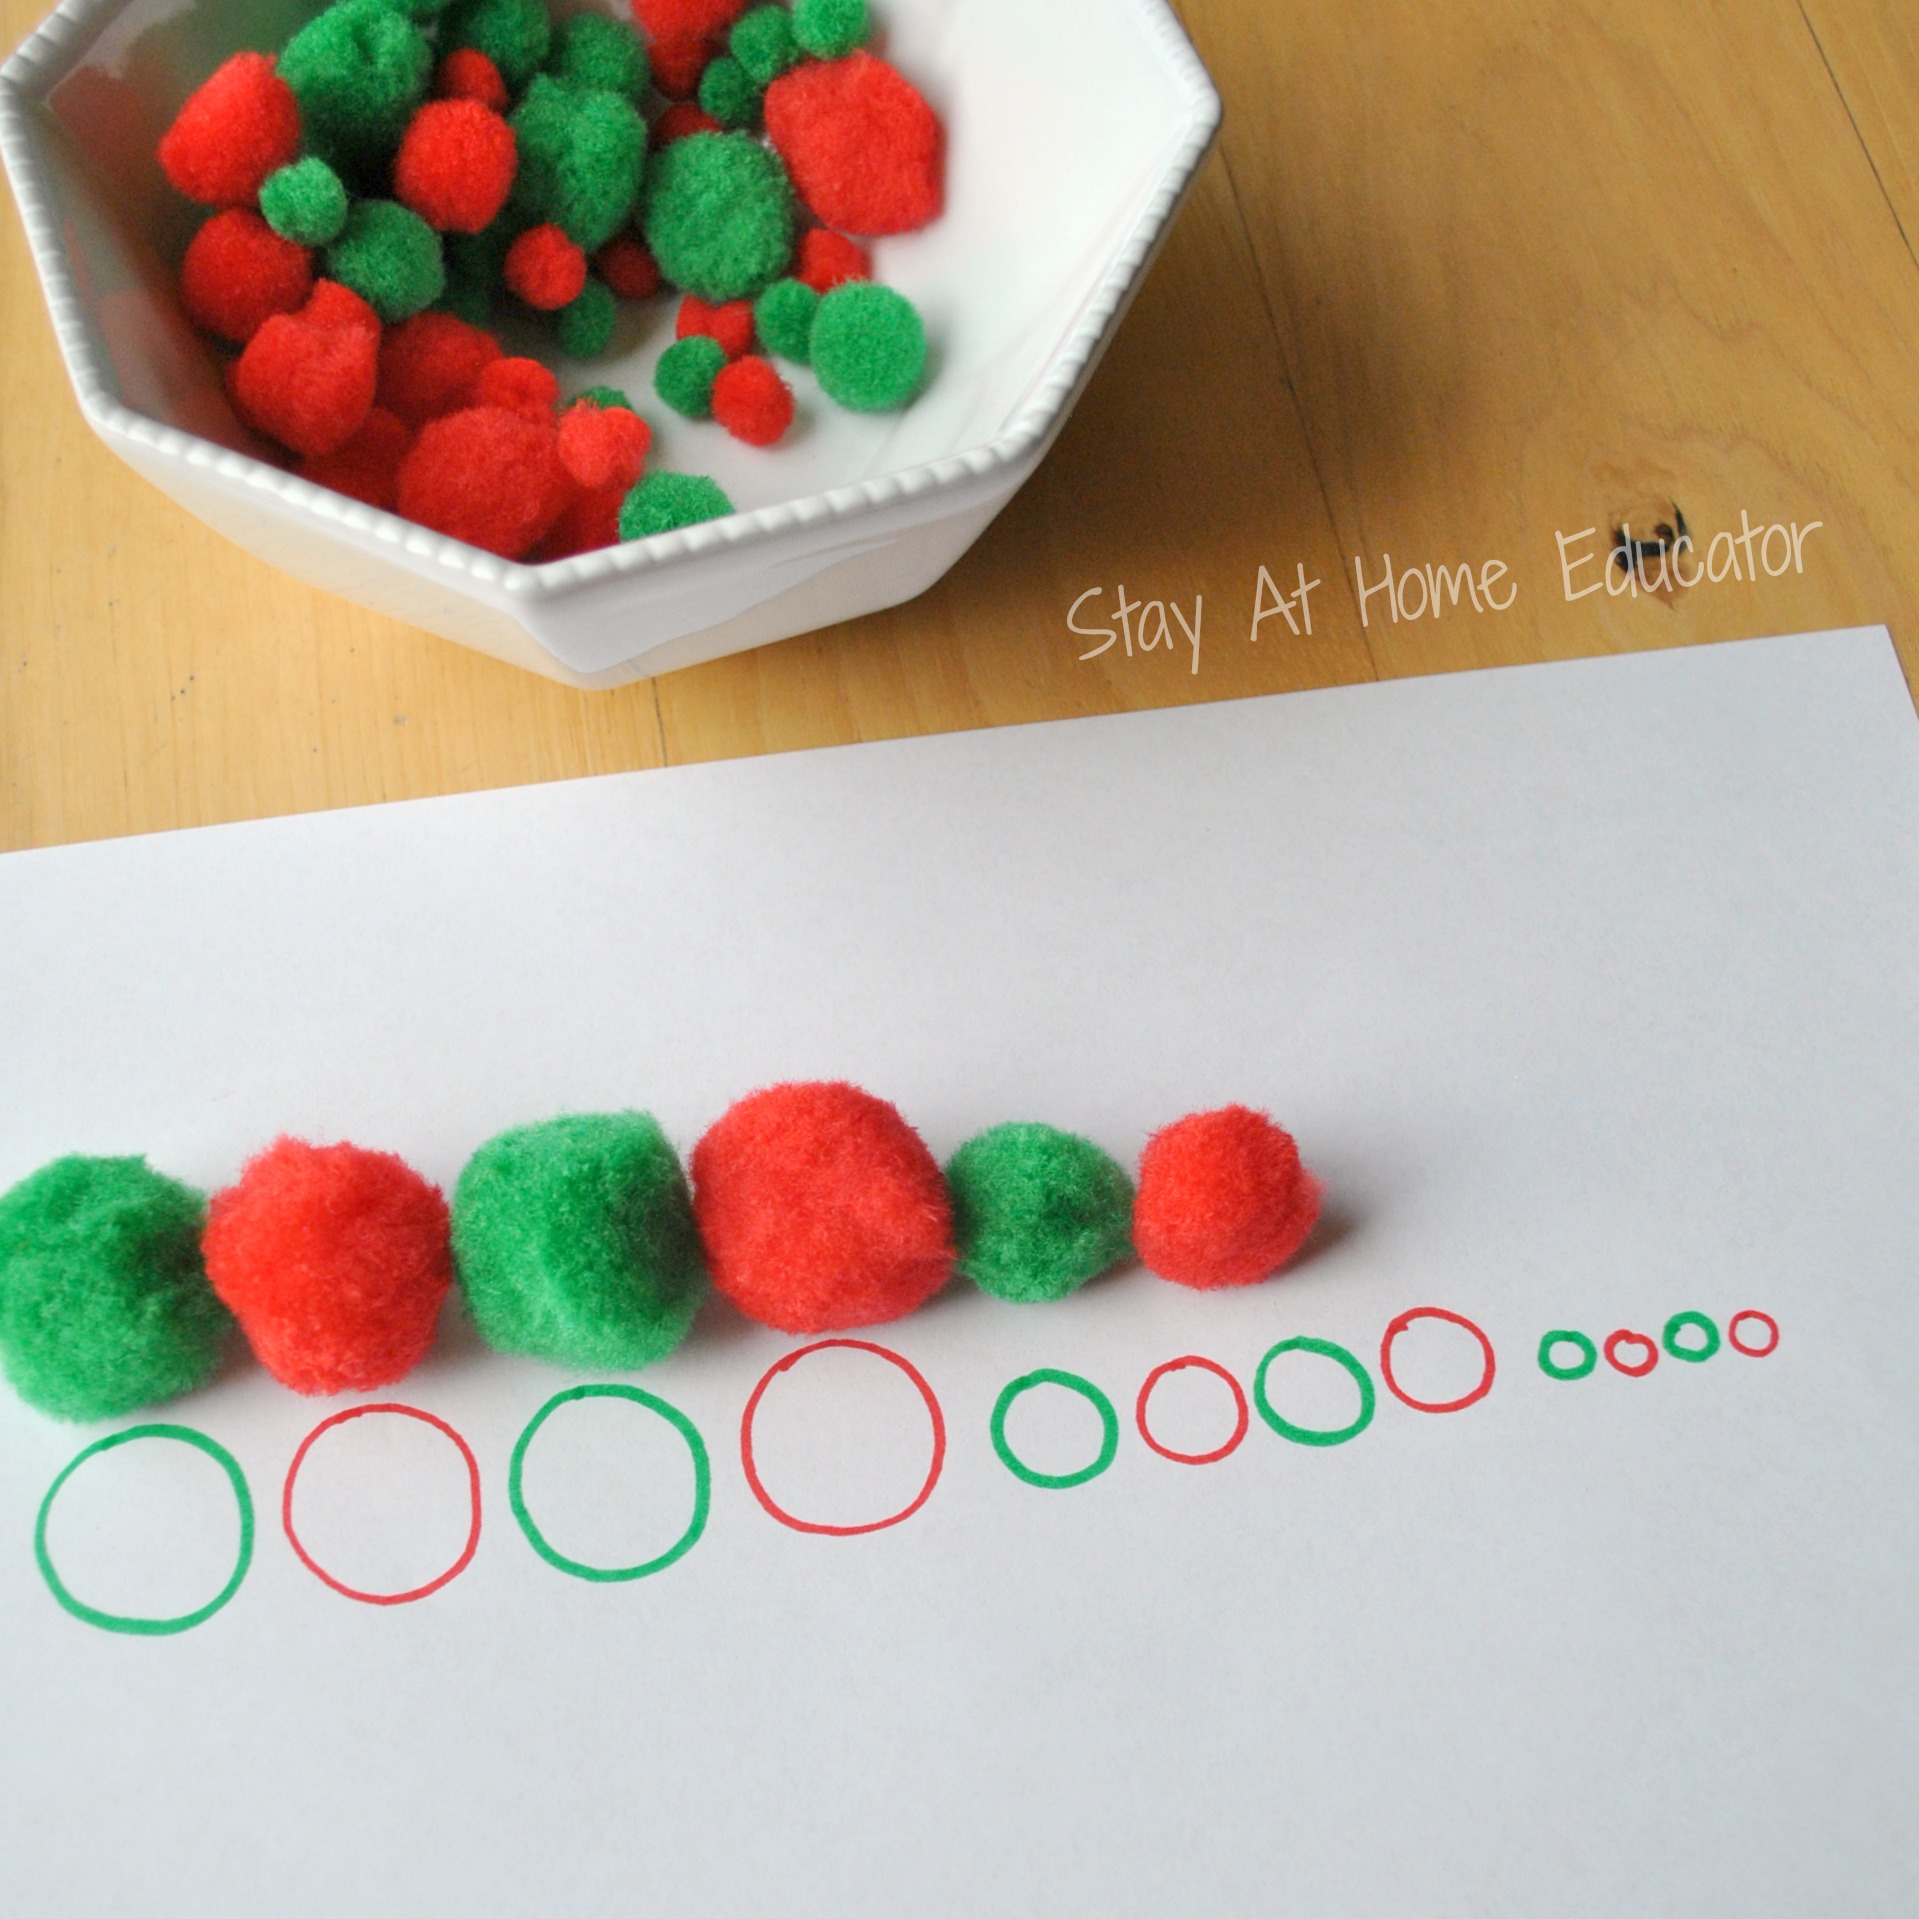 Christmas math activities for preschoolers - size and color sorting